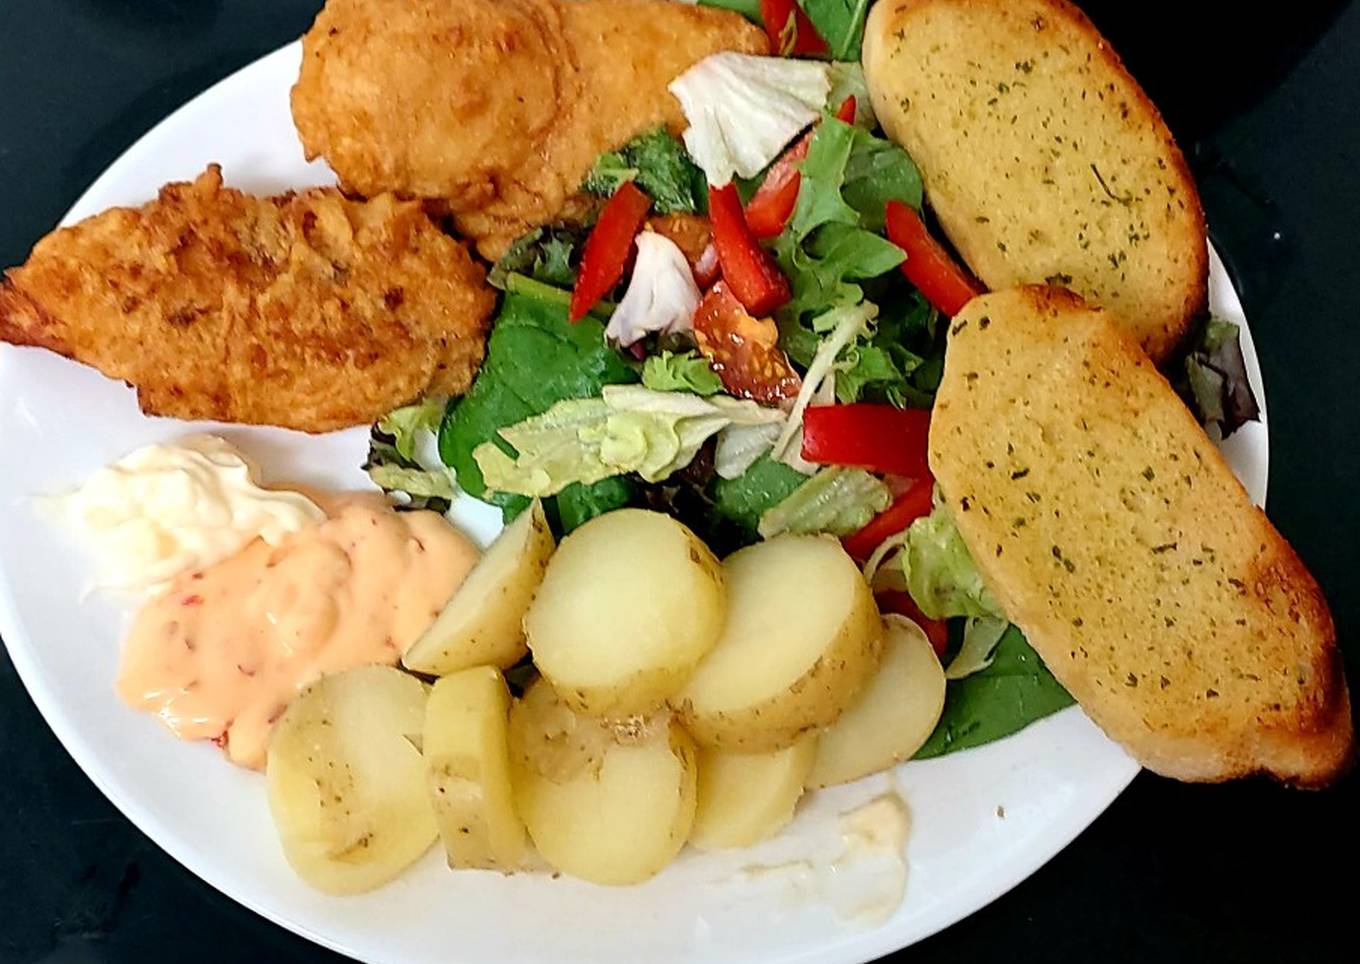 my buttermilk battered chicken breasts with salad